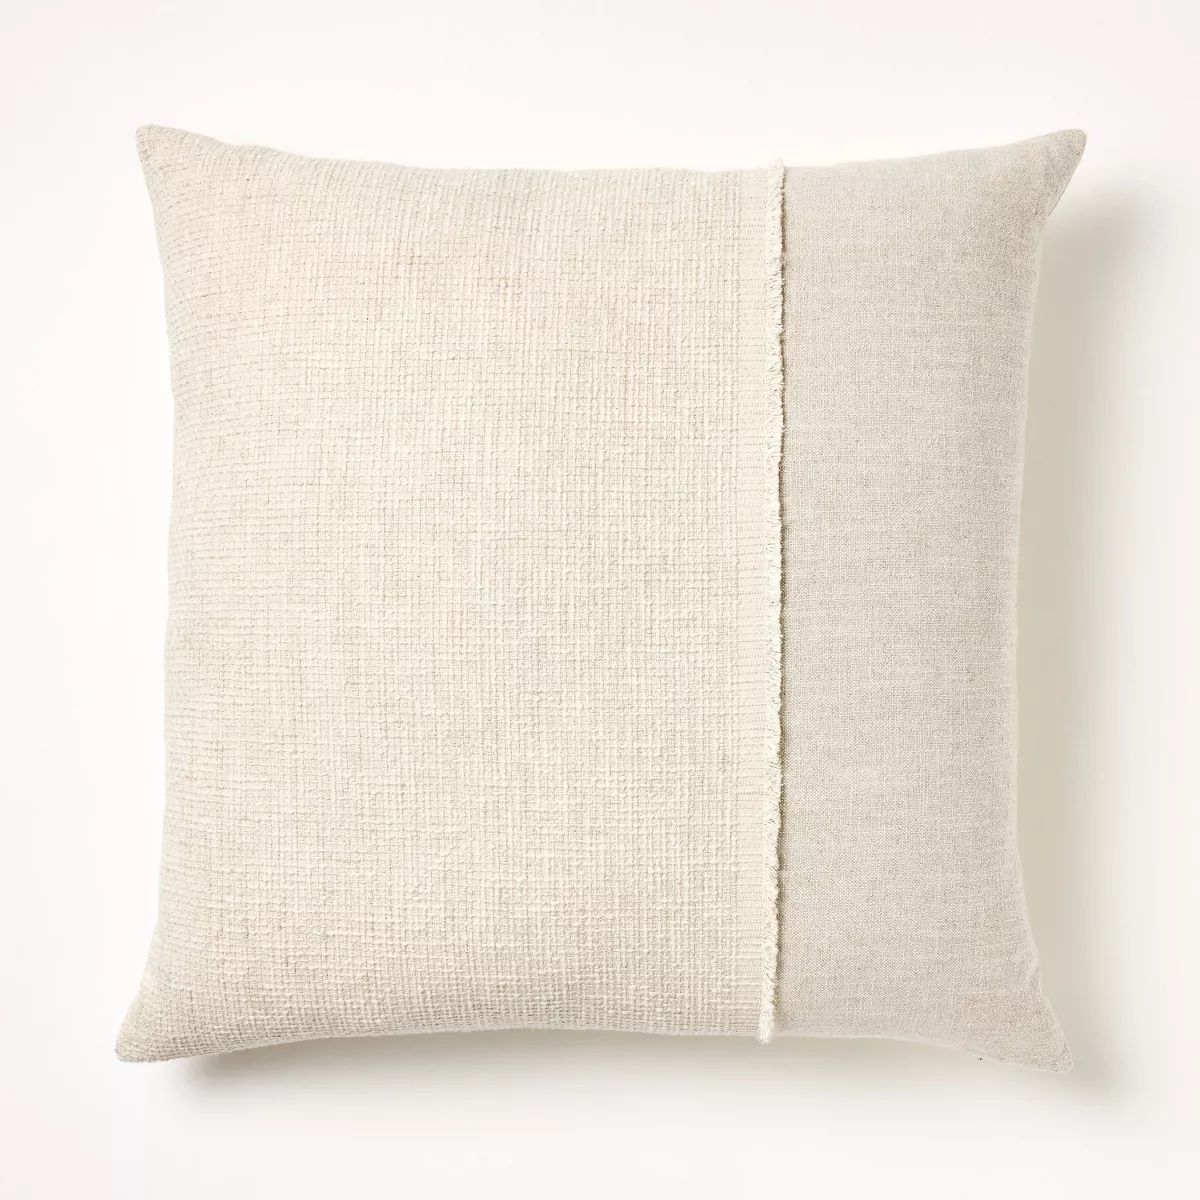 Oversized Pieced Square Throw Pillow Cream/Neutral - Threshold™ designed with Studio McGee | Target